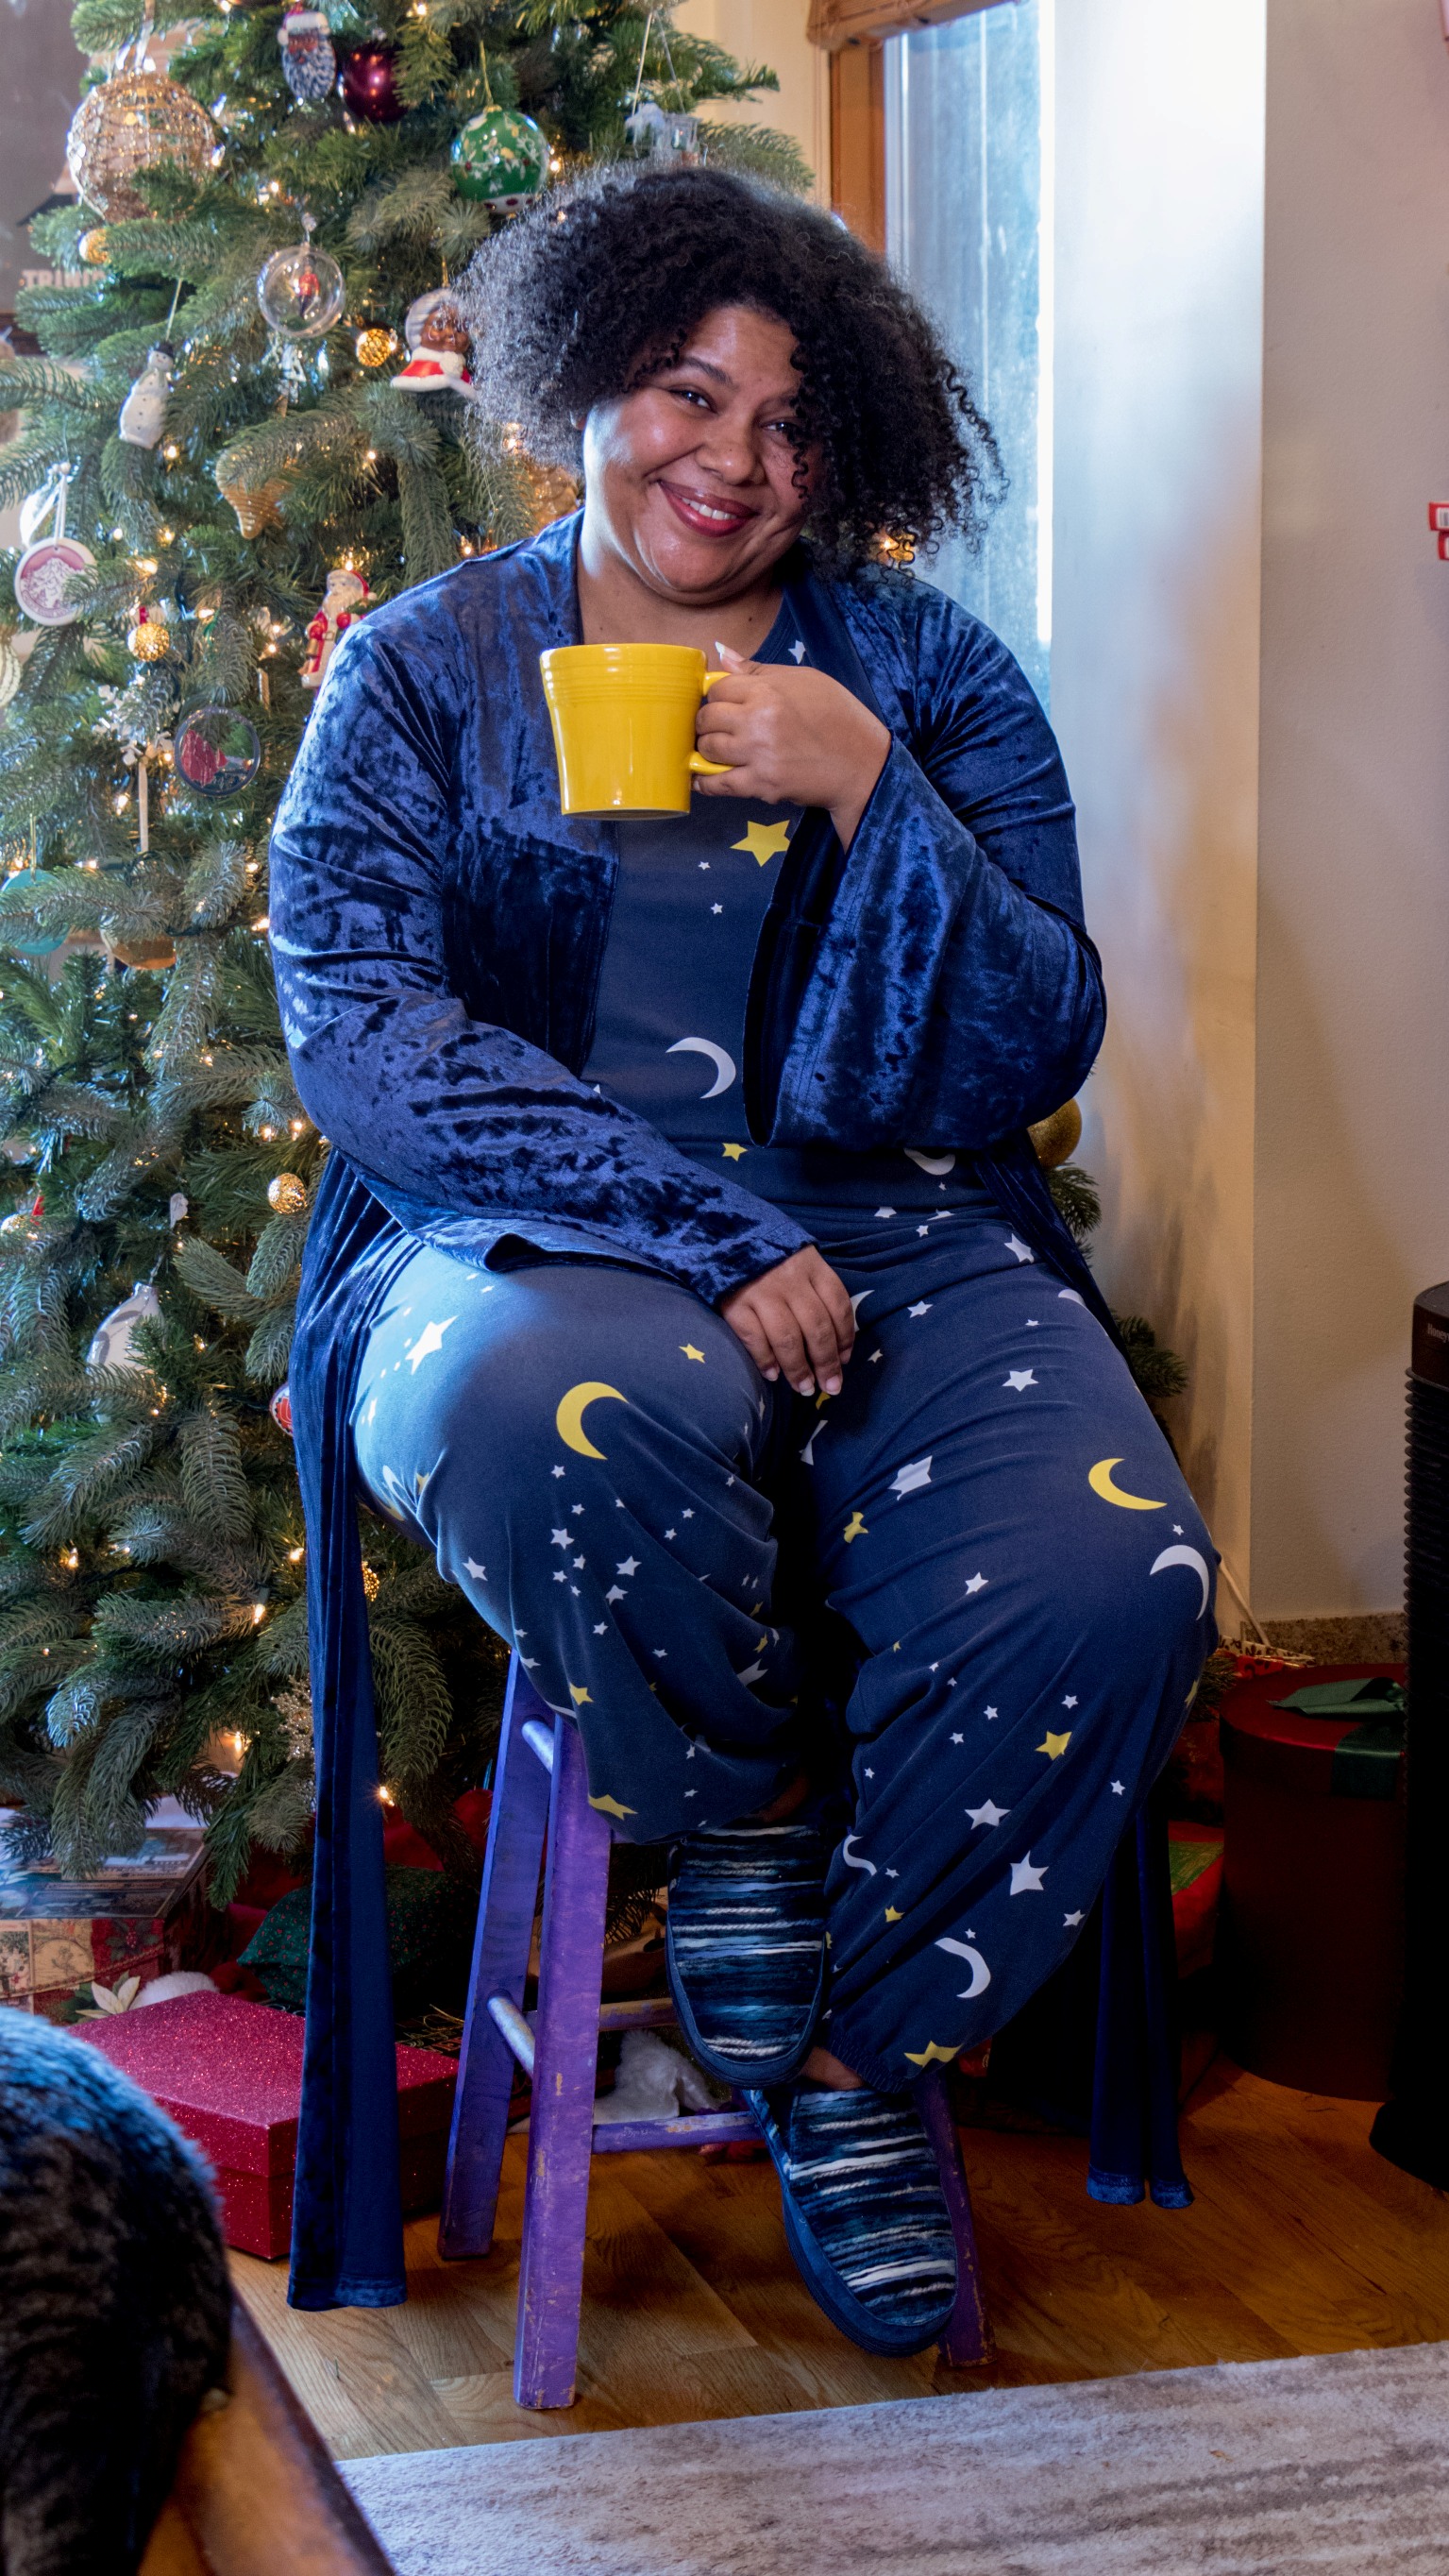 Afrobella in moon and stars pajamas, relaxing by the Christmas tree with a cup of tea. Happy holidays!